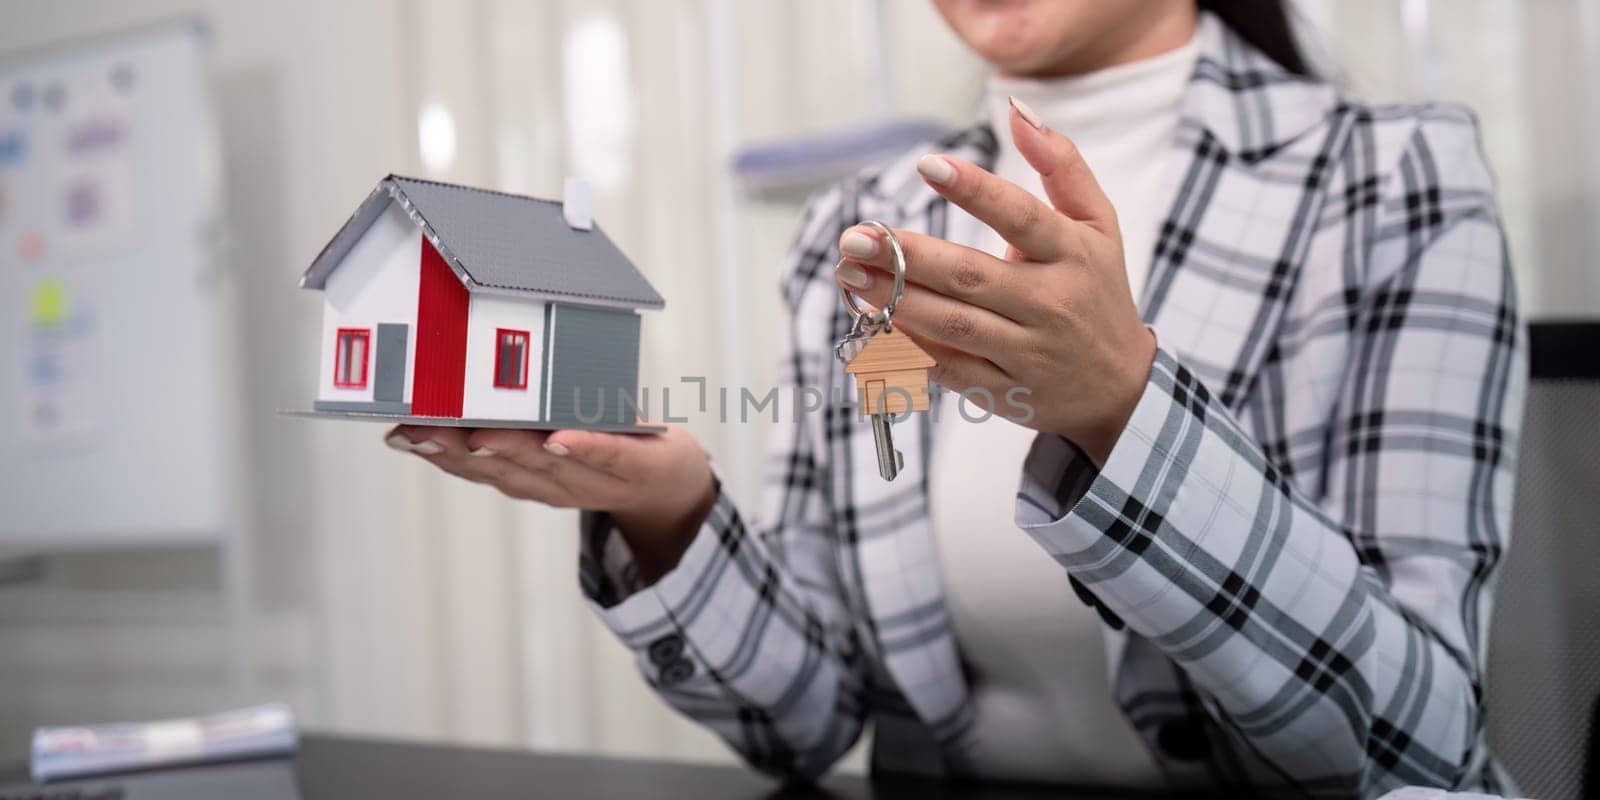 Real estate agent with house model and key.